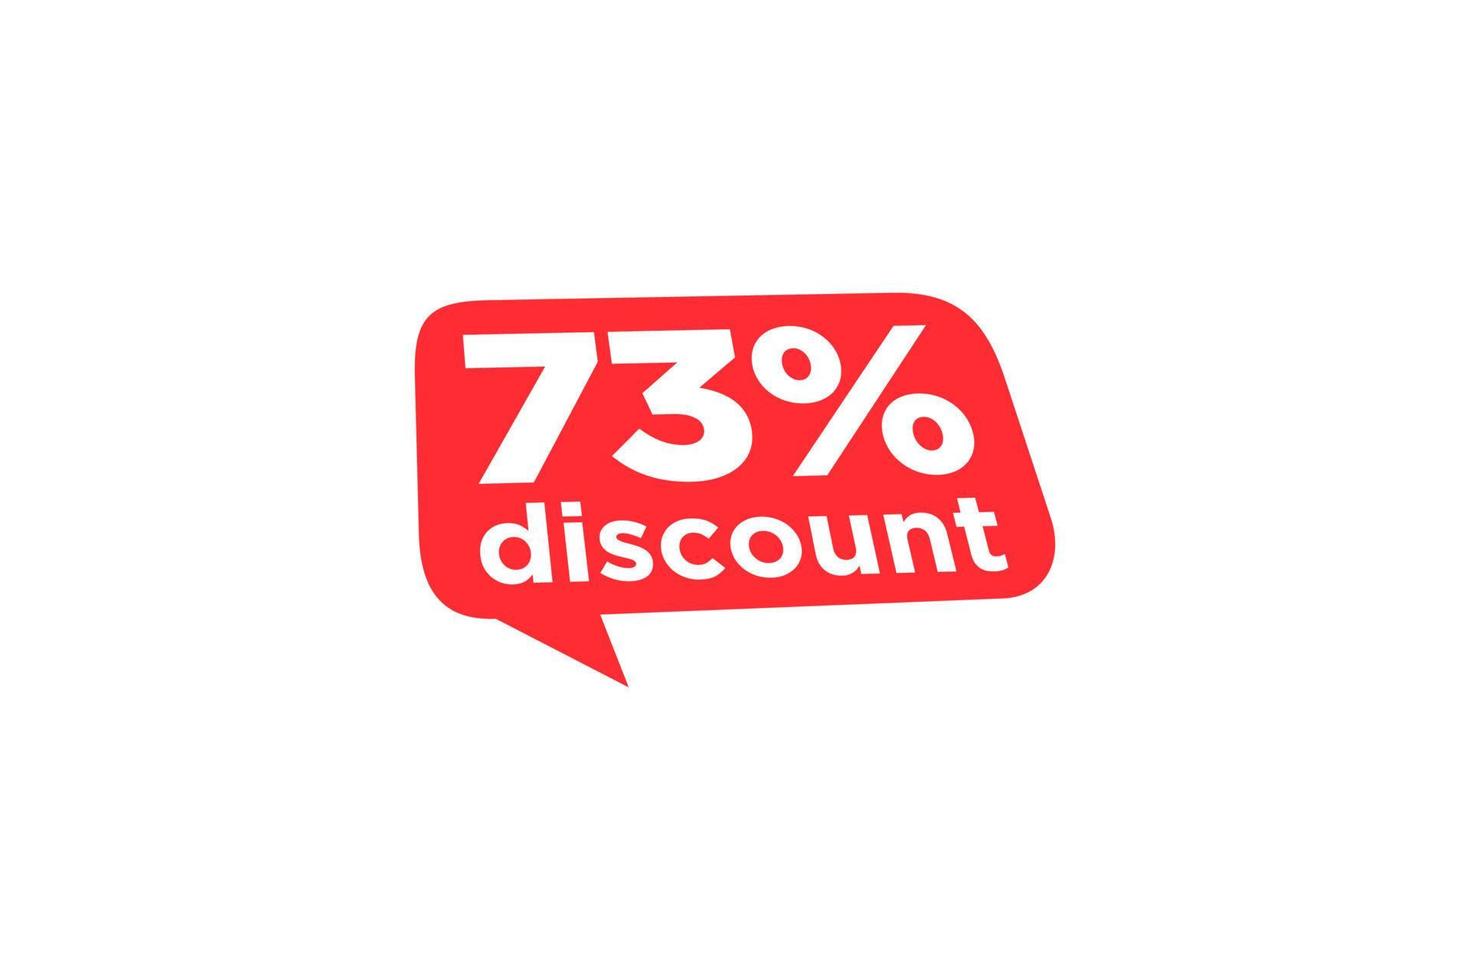 73 discount, Sales Vector badges for Labels, , Stickers, Banners, Tags, Web Stickers, New offer. Discount origami sign banner.